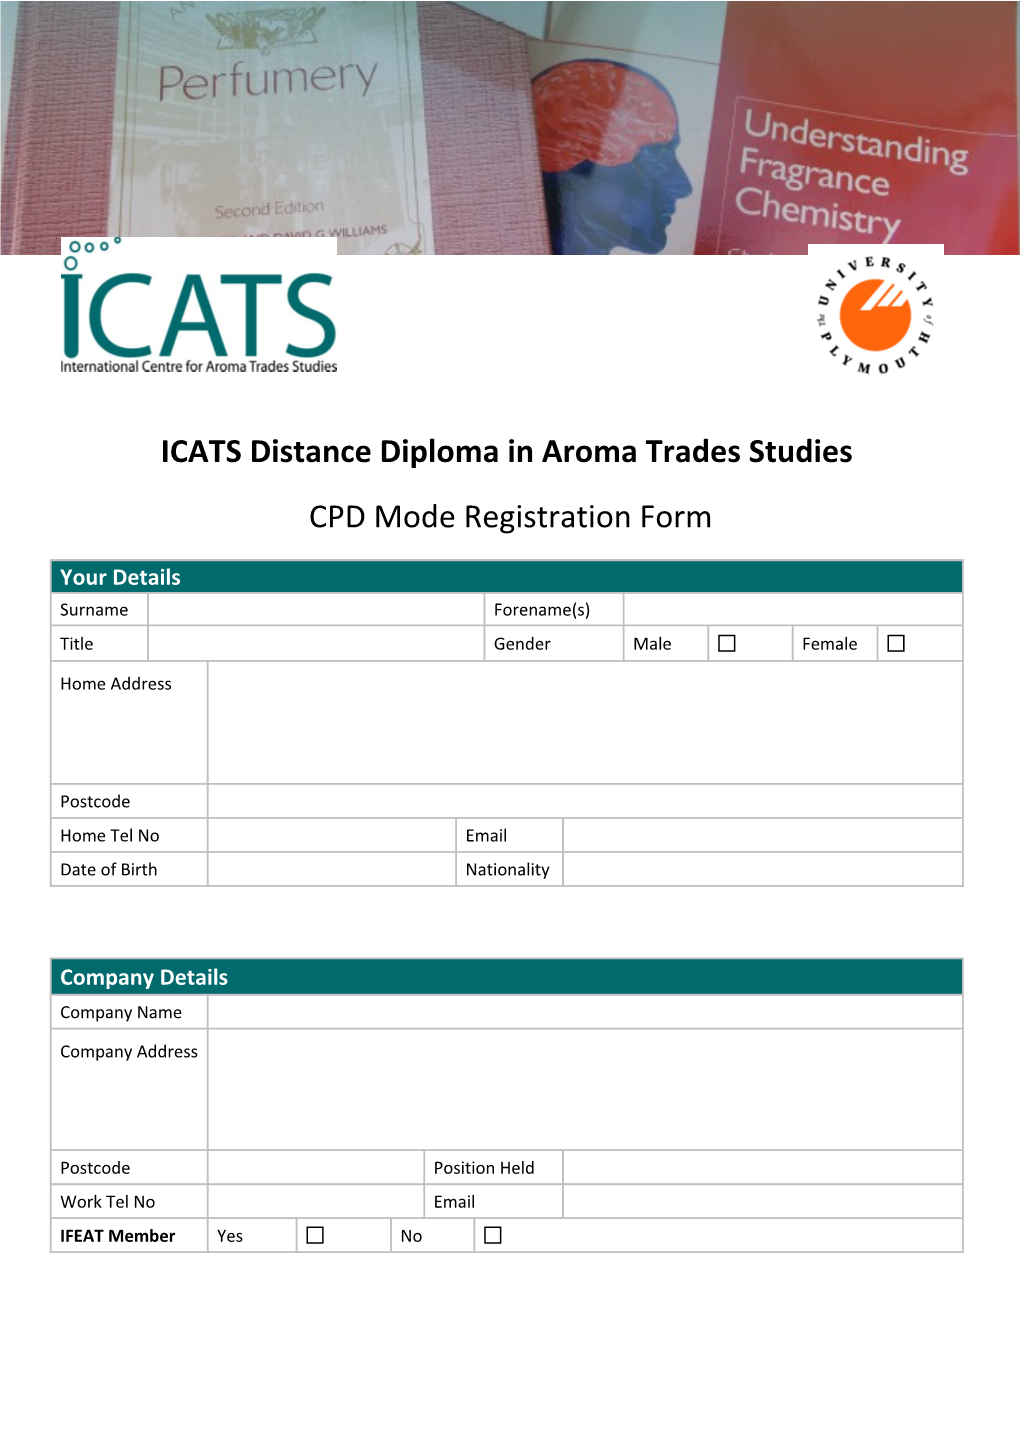 ICATS Distance Diploma in Aroma Trades Studies